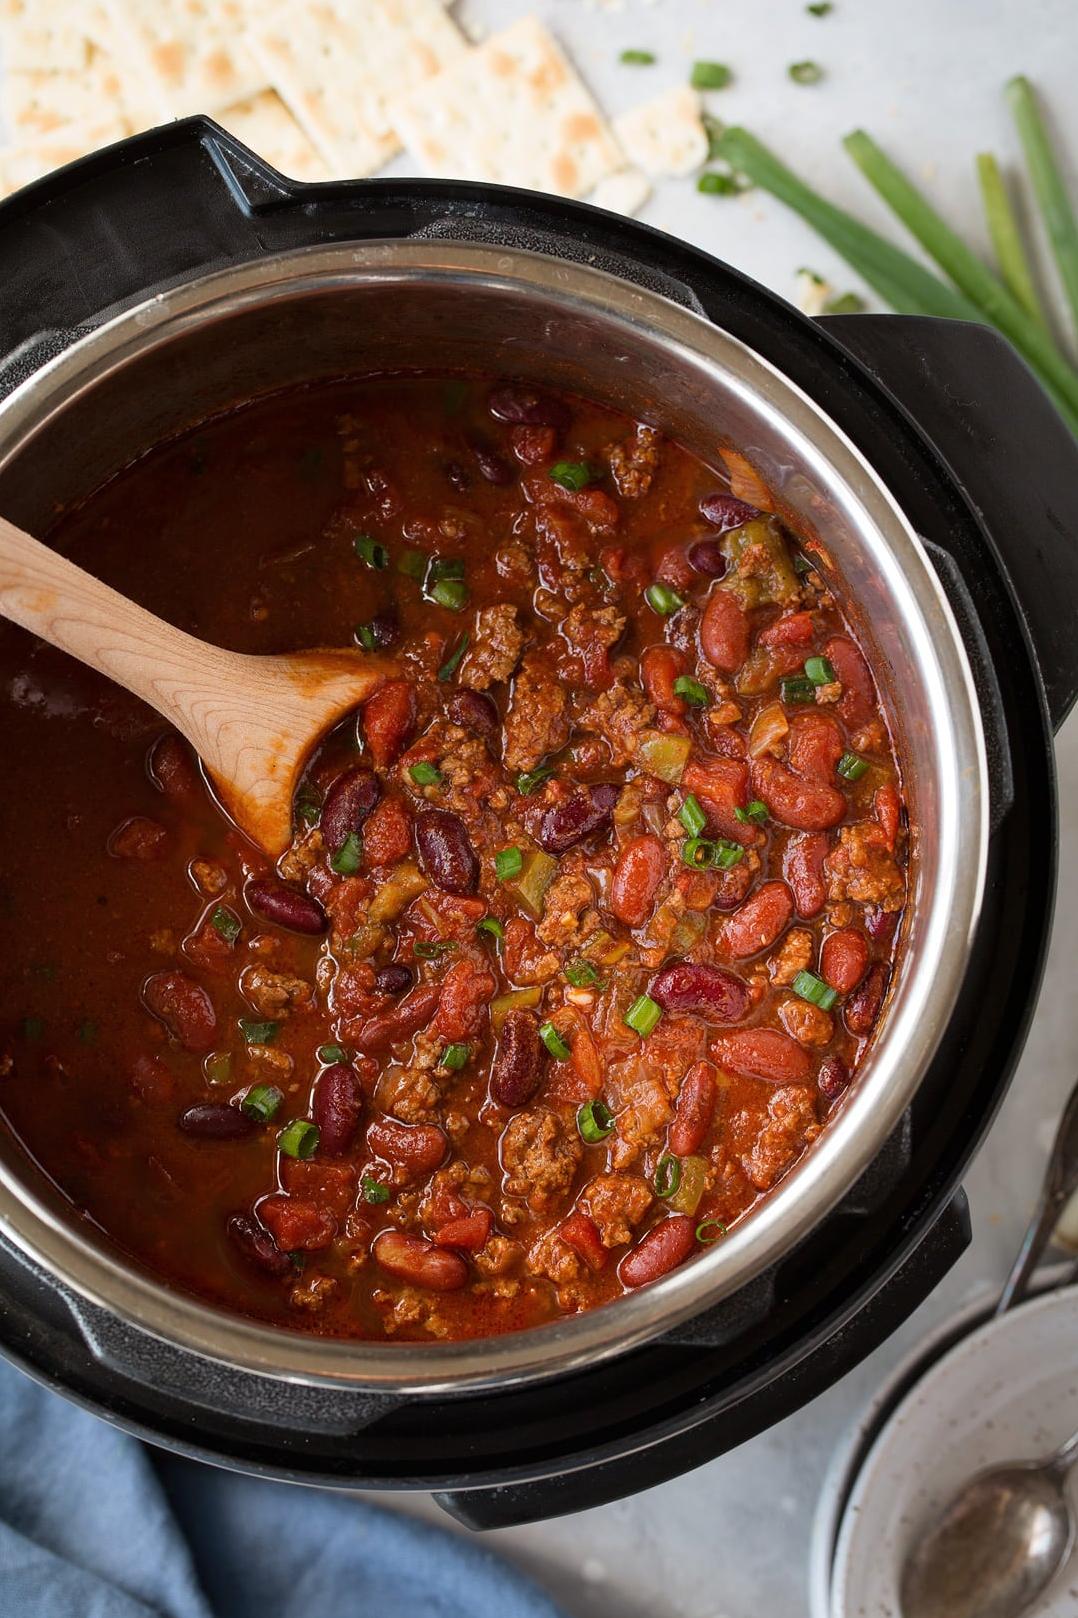  Get ready for a party in your mouth with this chili